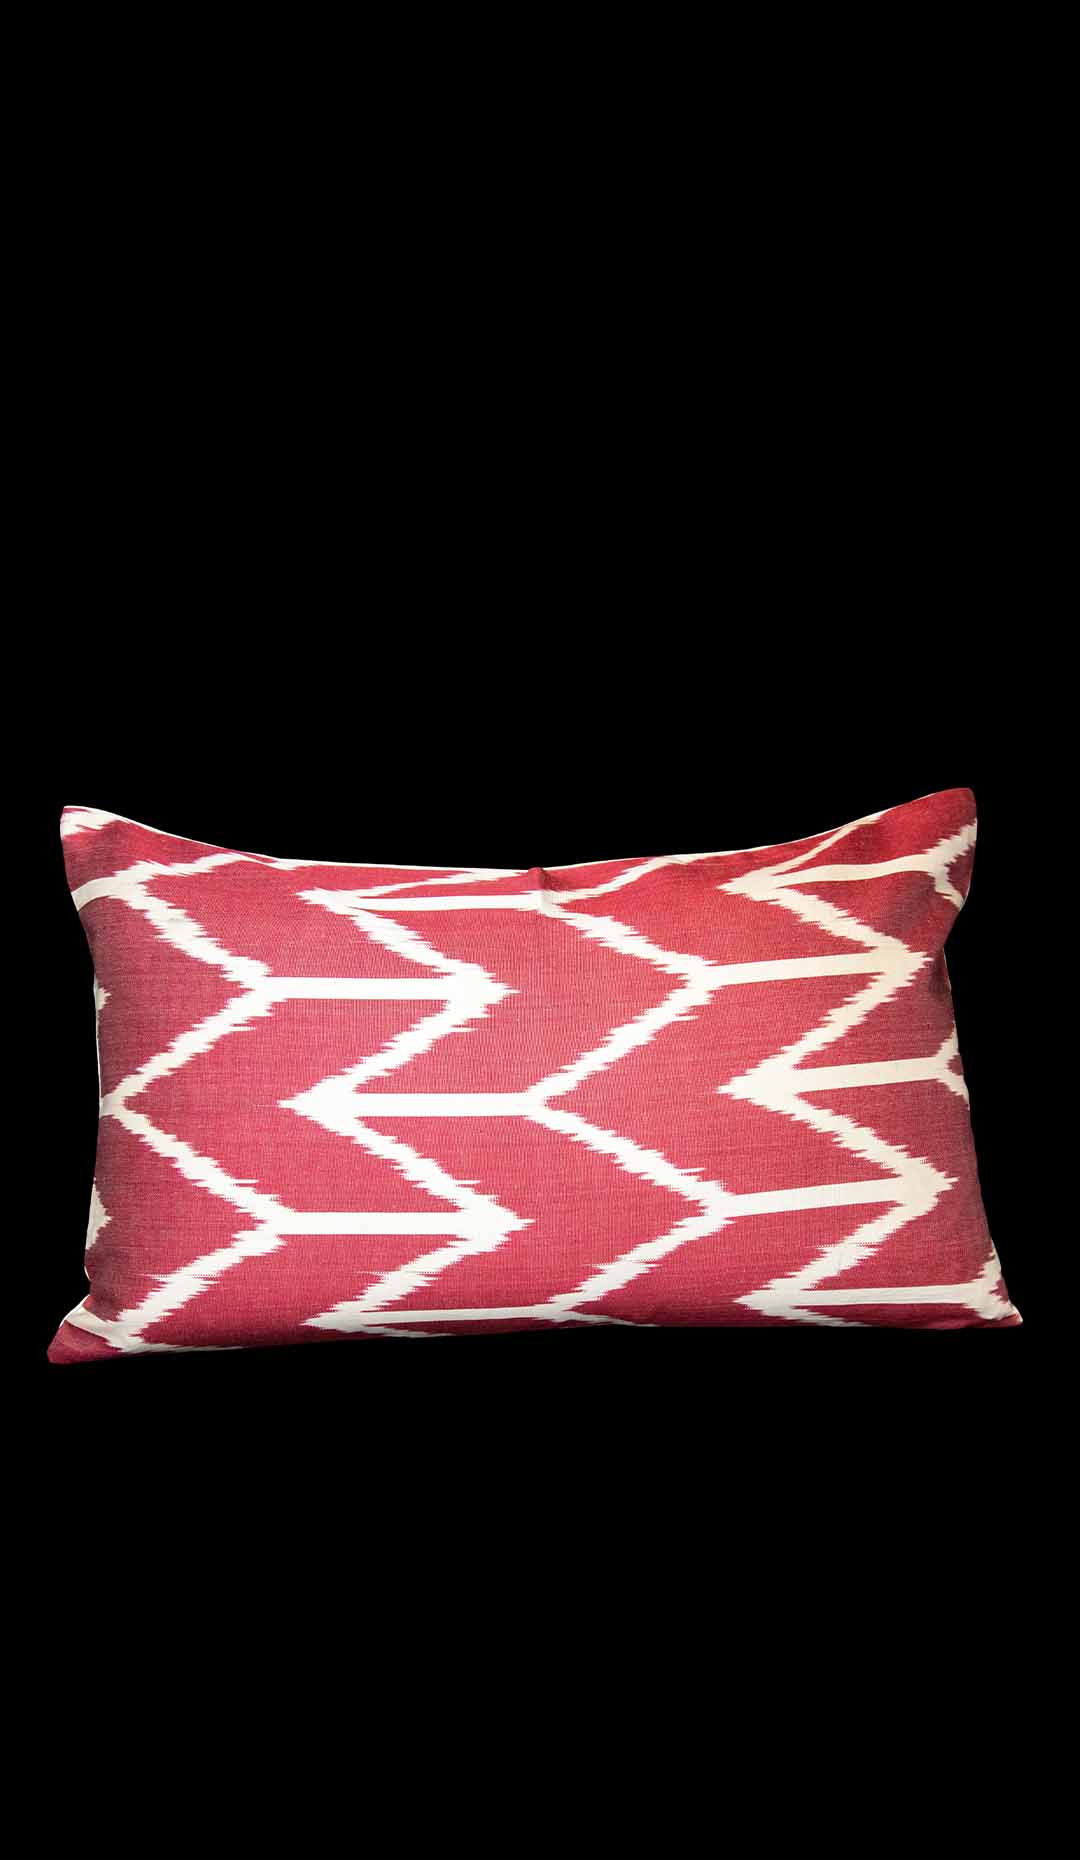 Ikat Pillowcover, Red and White